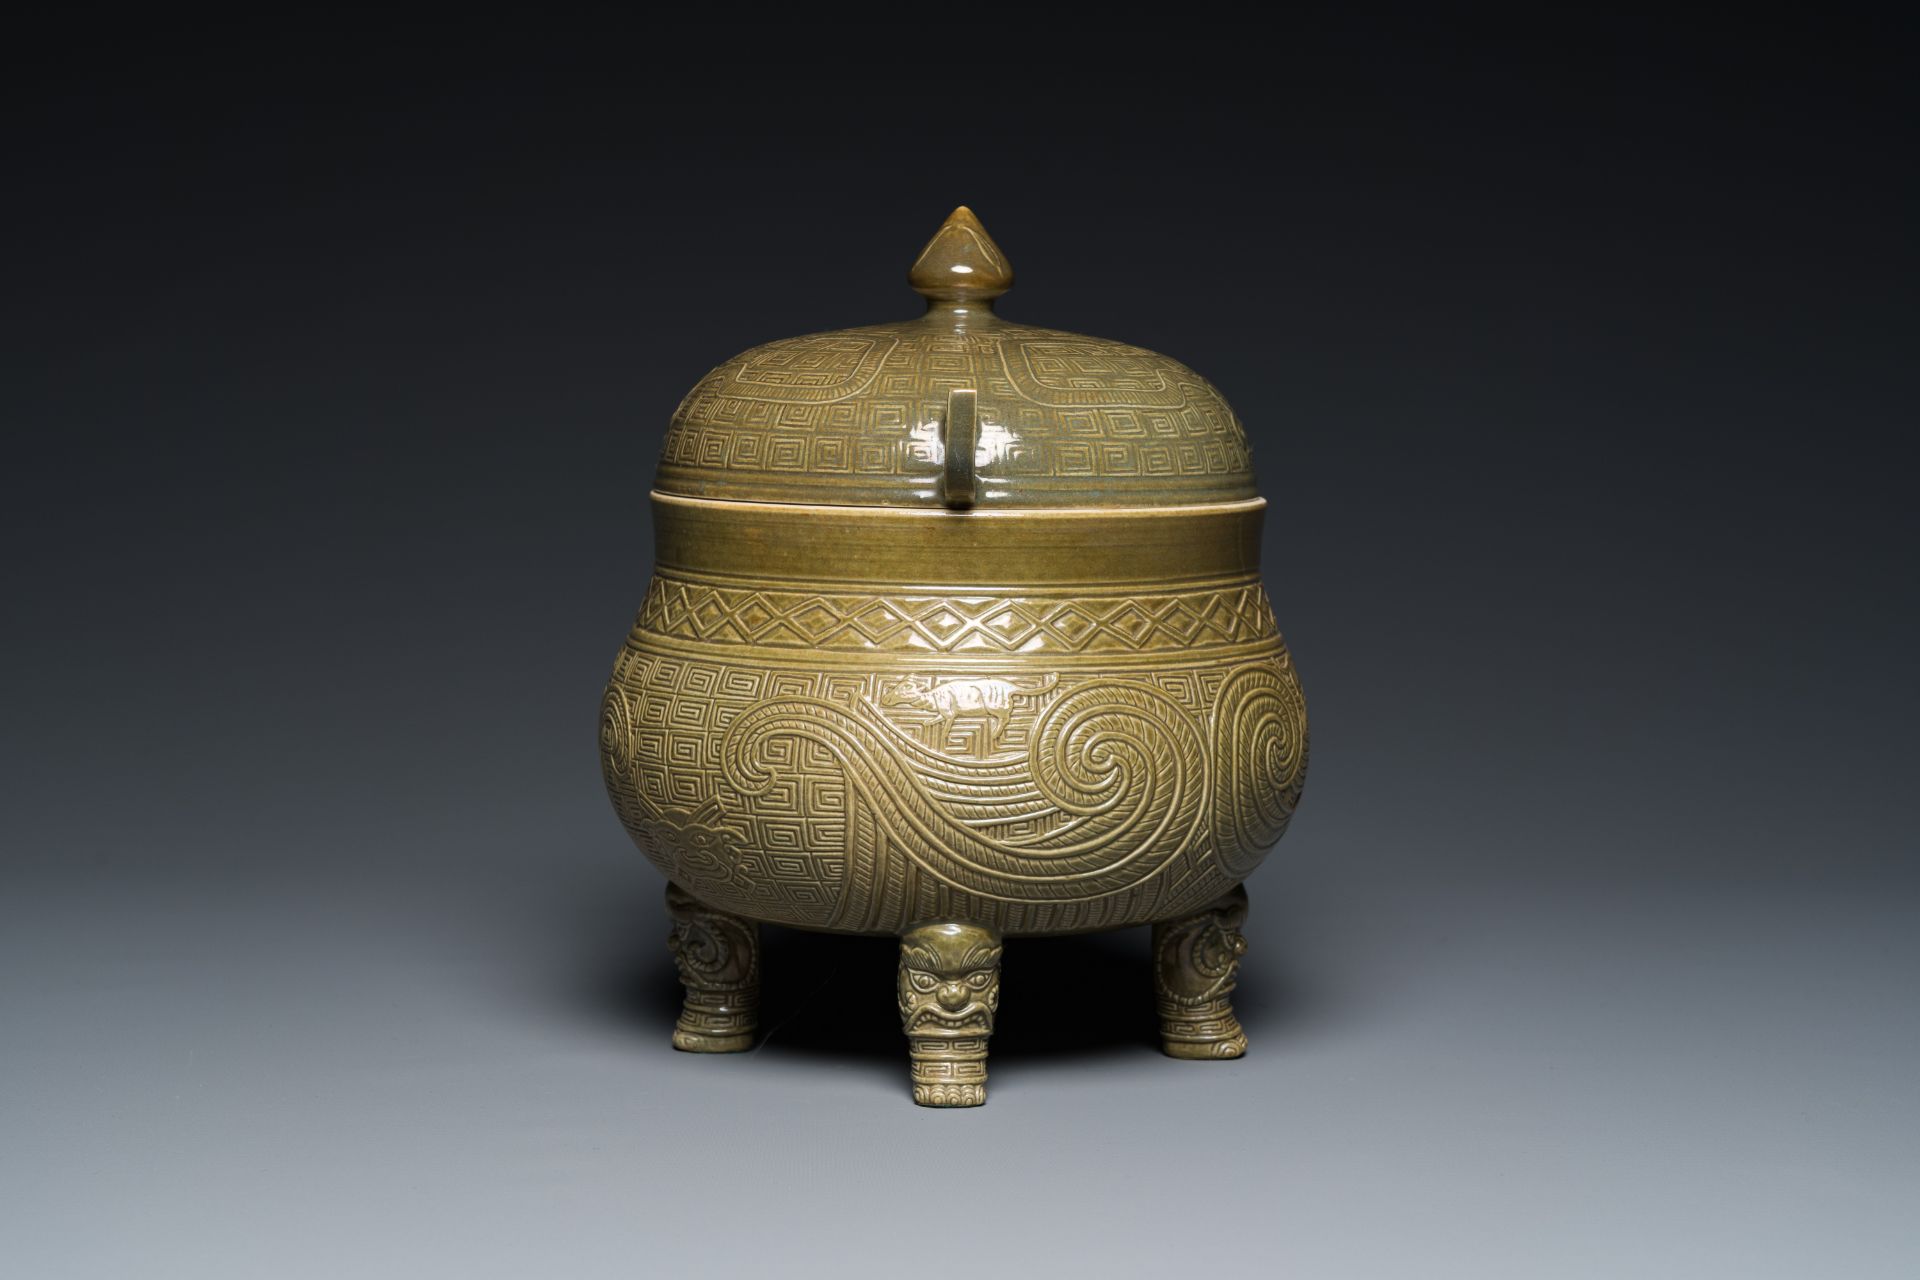 A rare Chinese teadust-glazed food vessel & cover, 'dui 敦', Hua Ting Shi Zhi 華亭氏製 mark, late 19th C. - Image 3 of 7